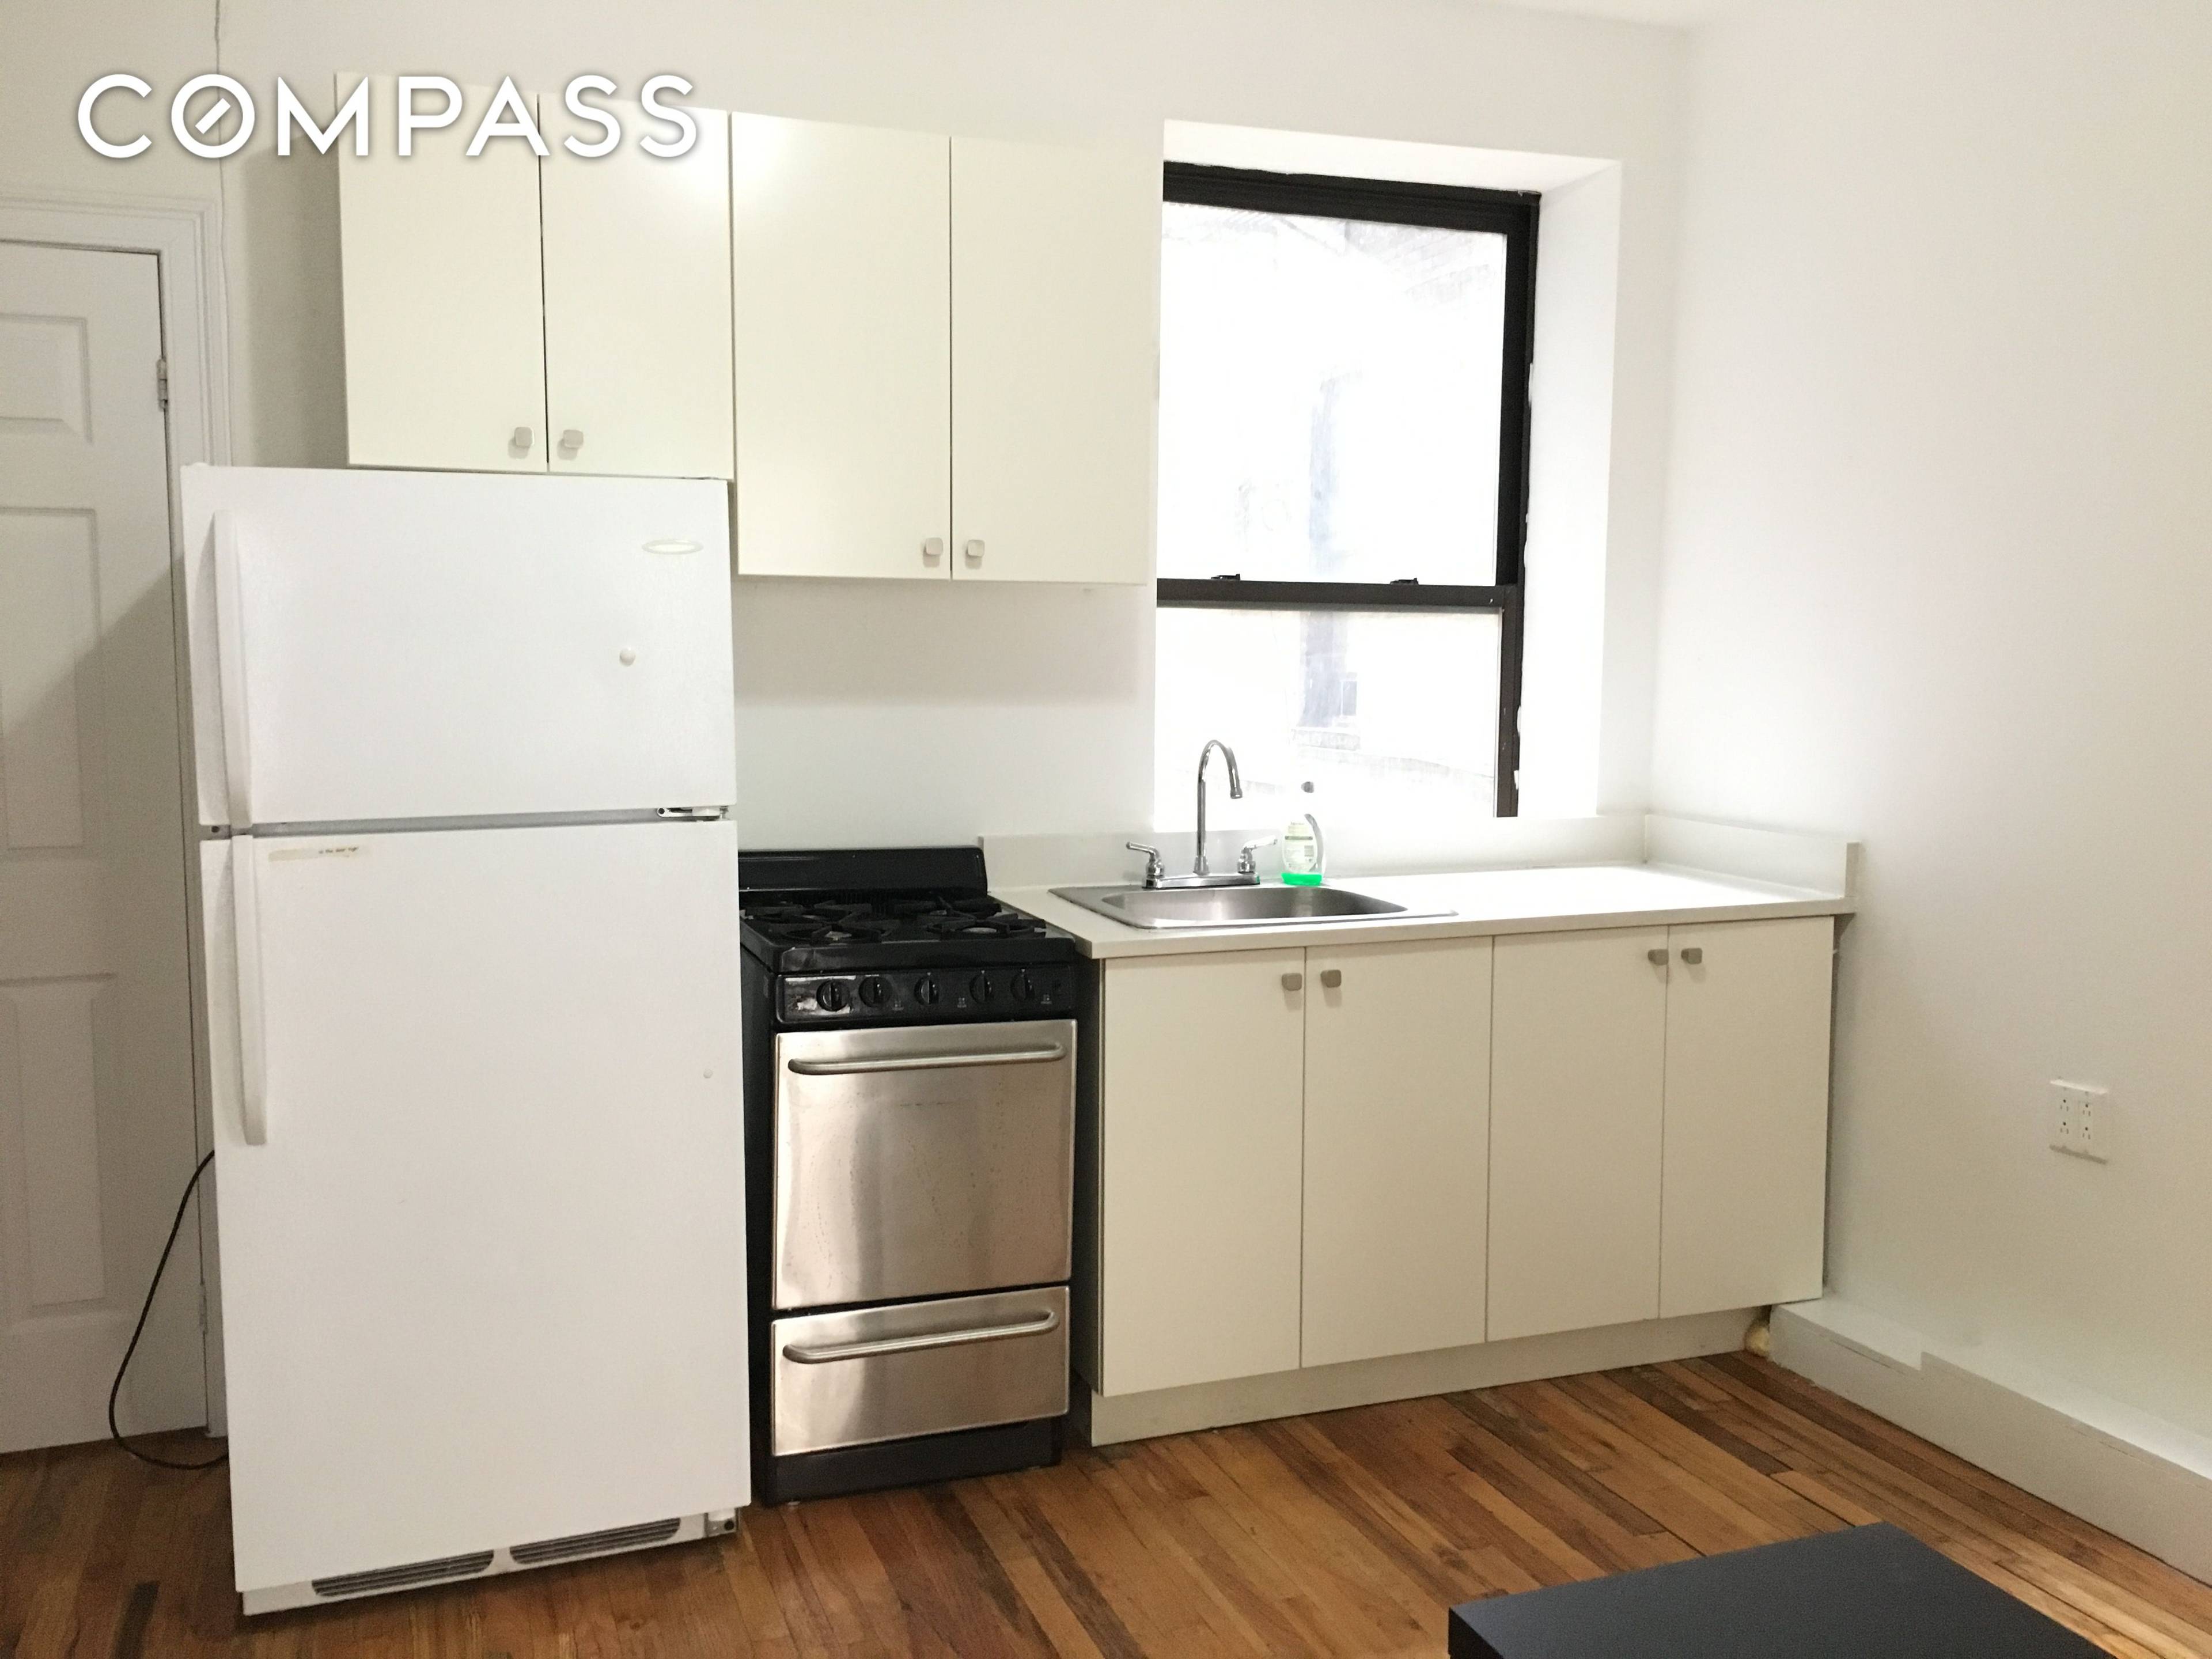 Great Share for Columbia University students Amazing 5 Bedrooms, 1st floor, renovated Apartment in highly sought after Upper West Side Neighborhood ; Shares are welcome and Perfect apartment for Columbia ...